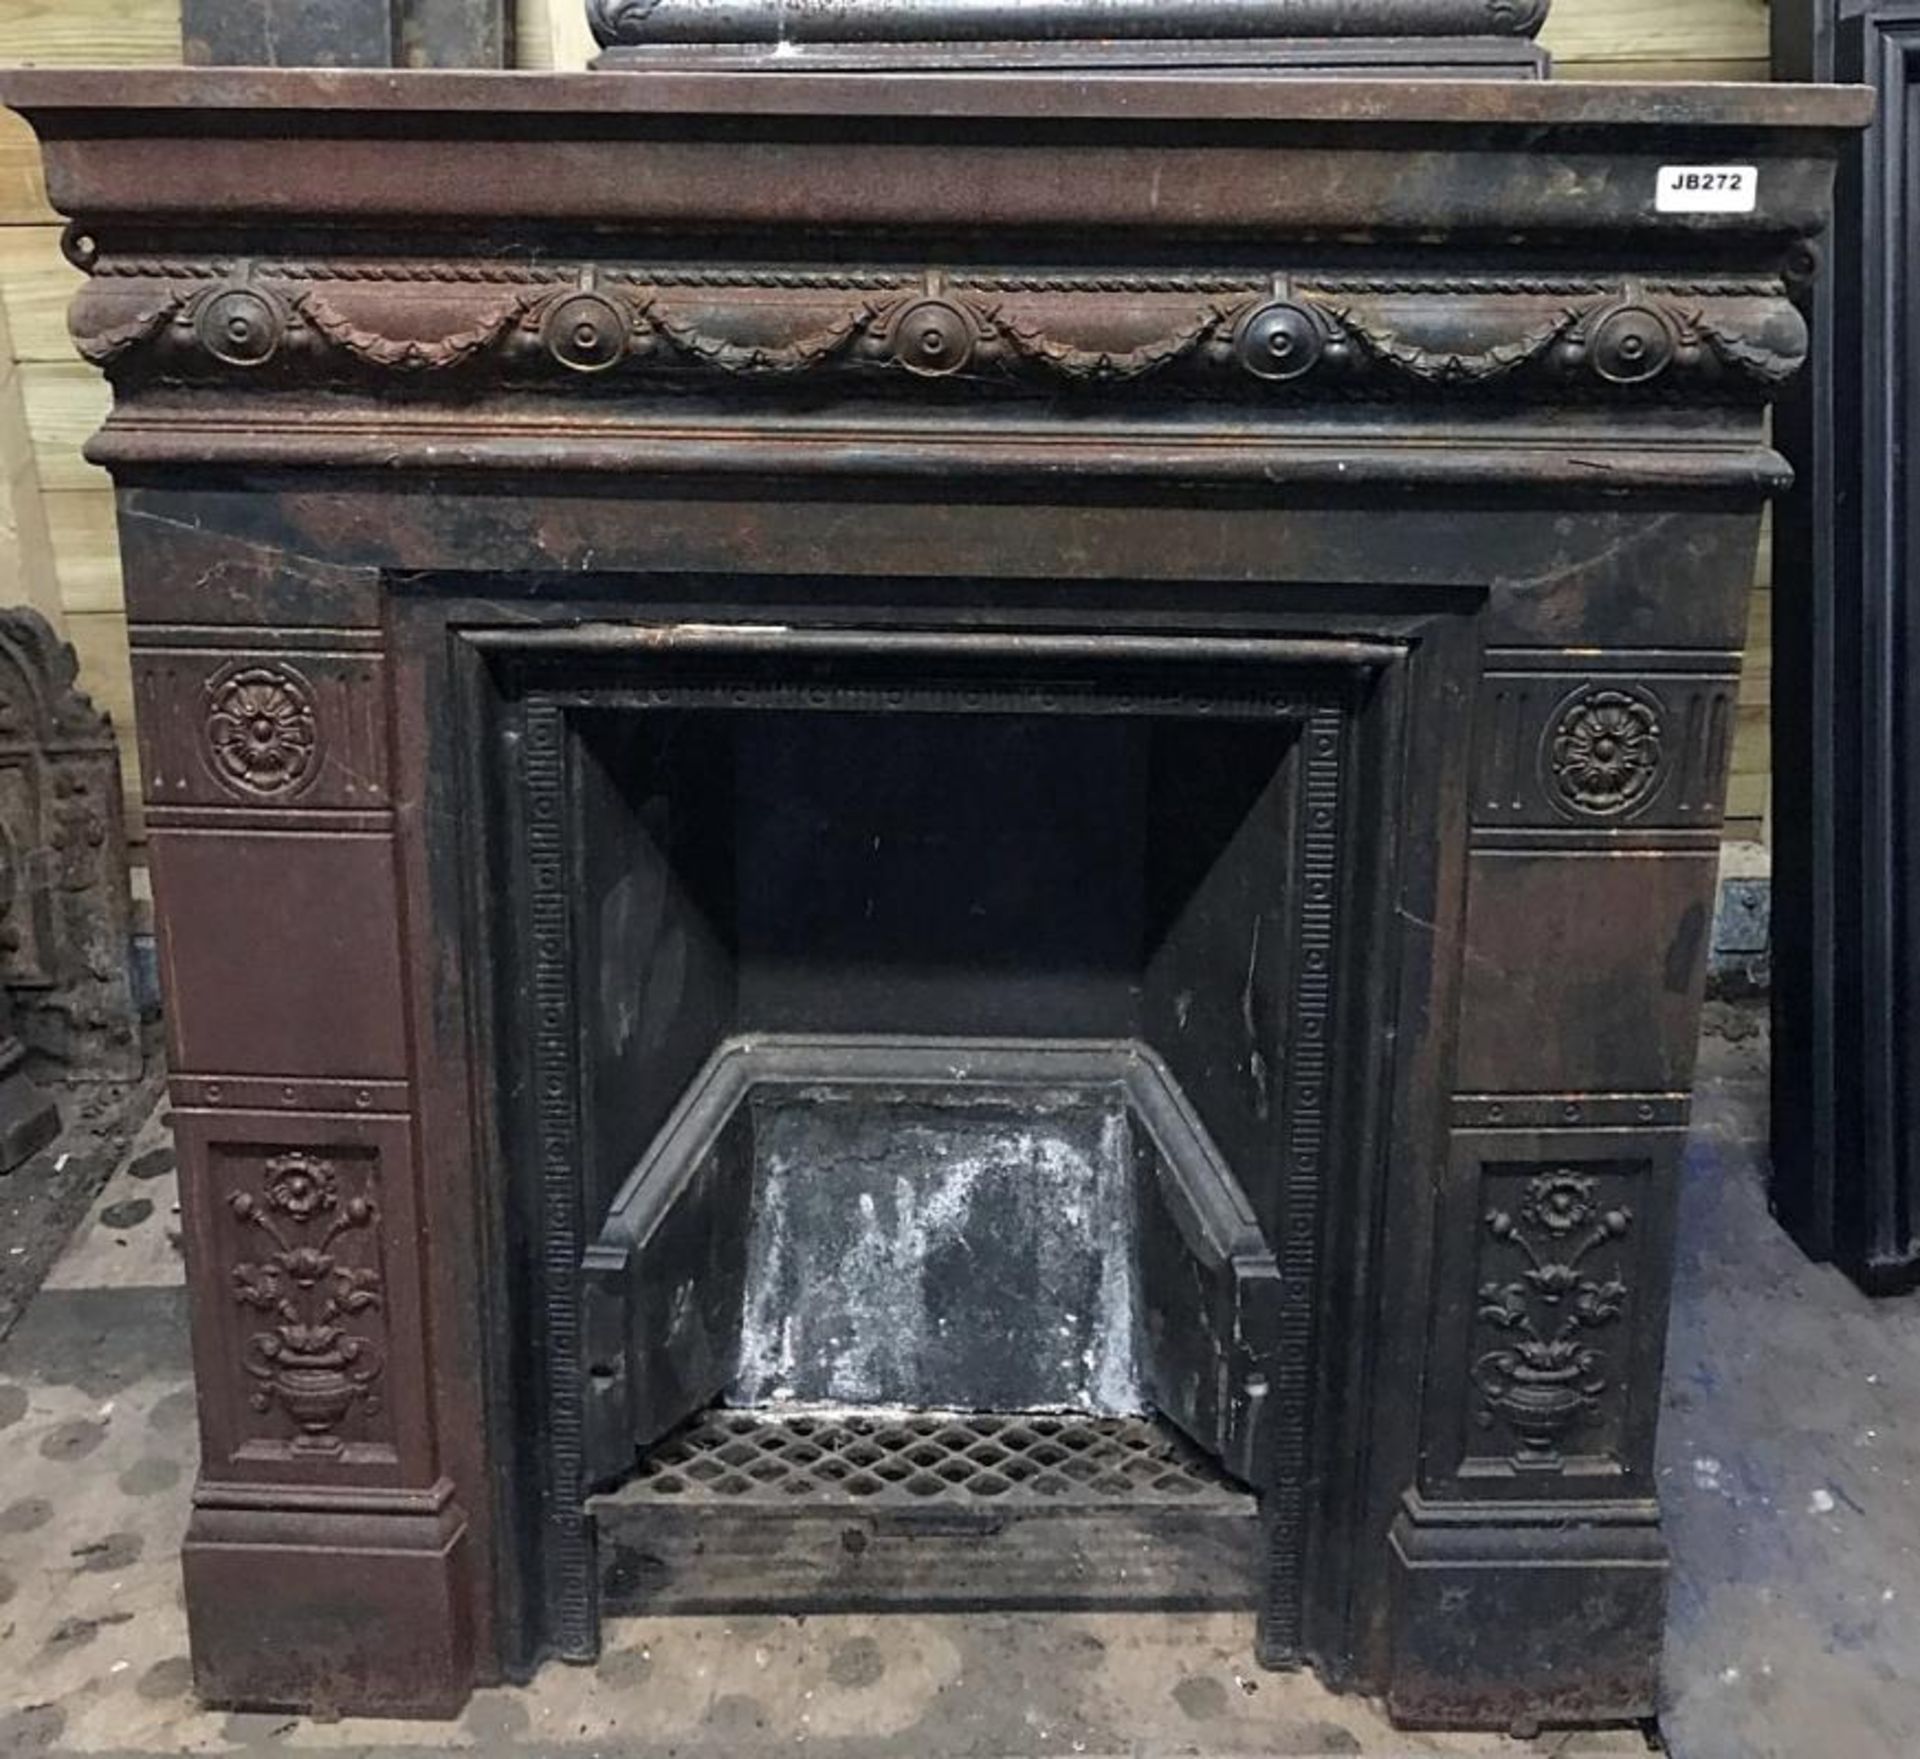 1 x Stunning Antique Victorian Cast Iron Fire Surround With Ornate Sides - Dimensions: Height